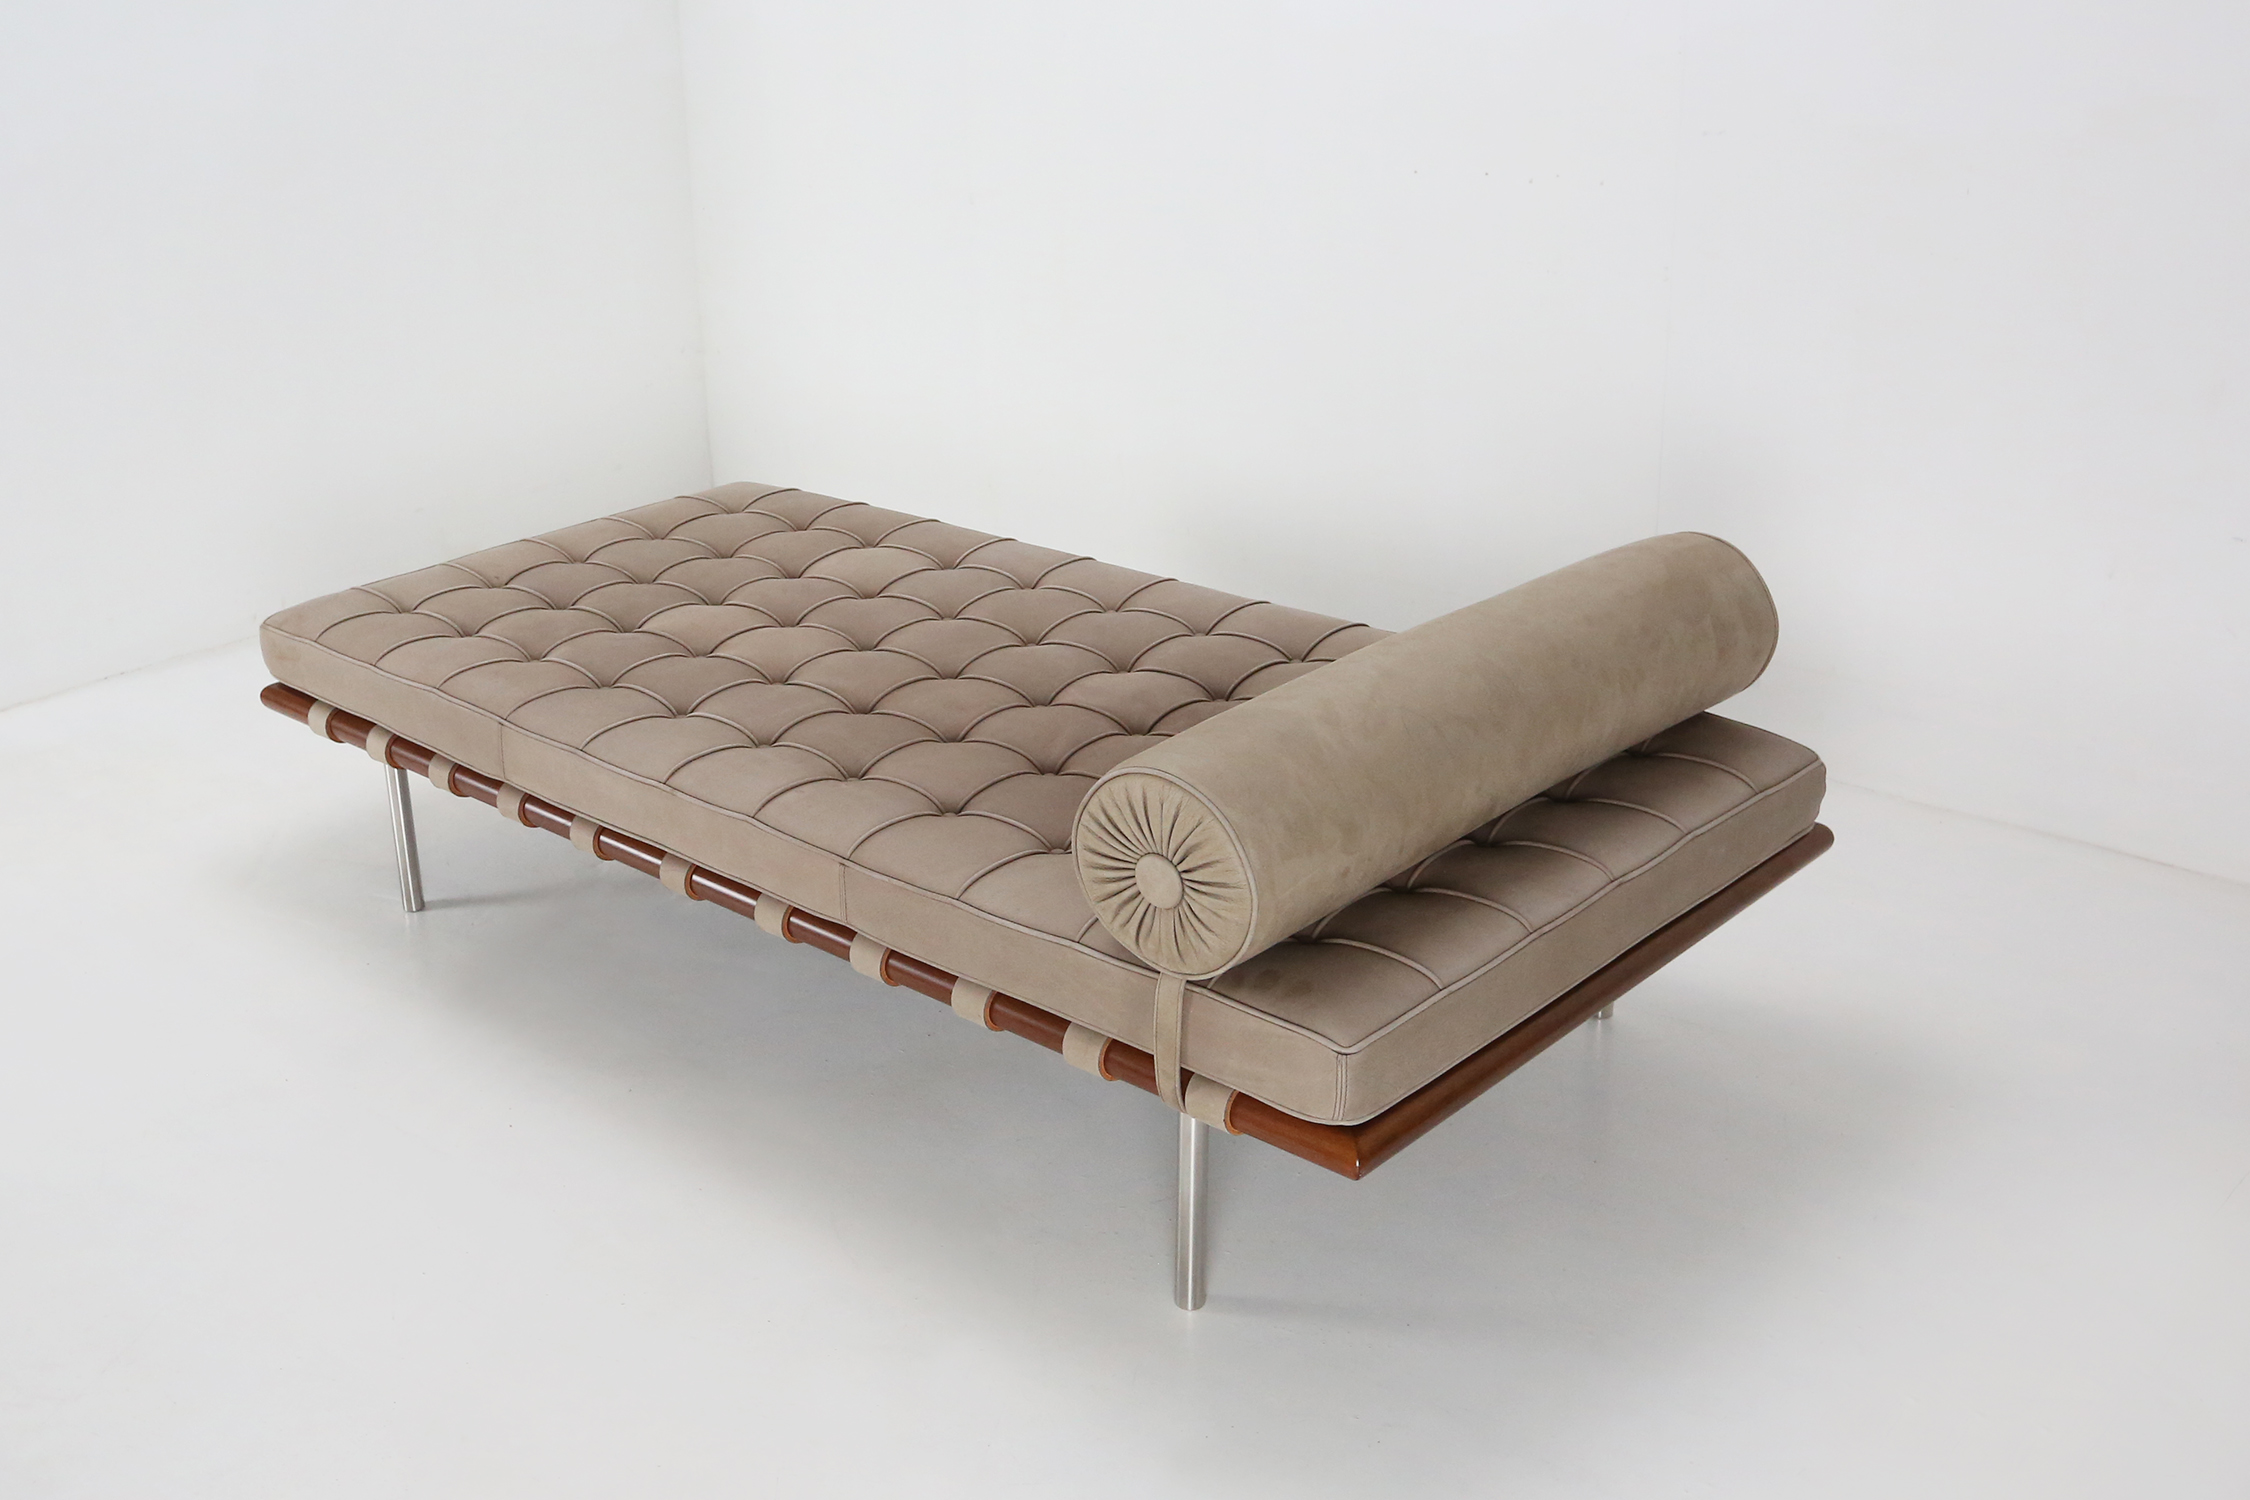 Barcelona daybed by Mies van der Rohe